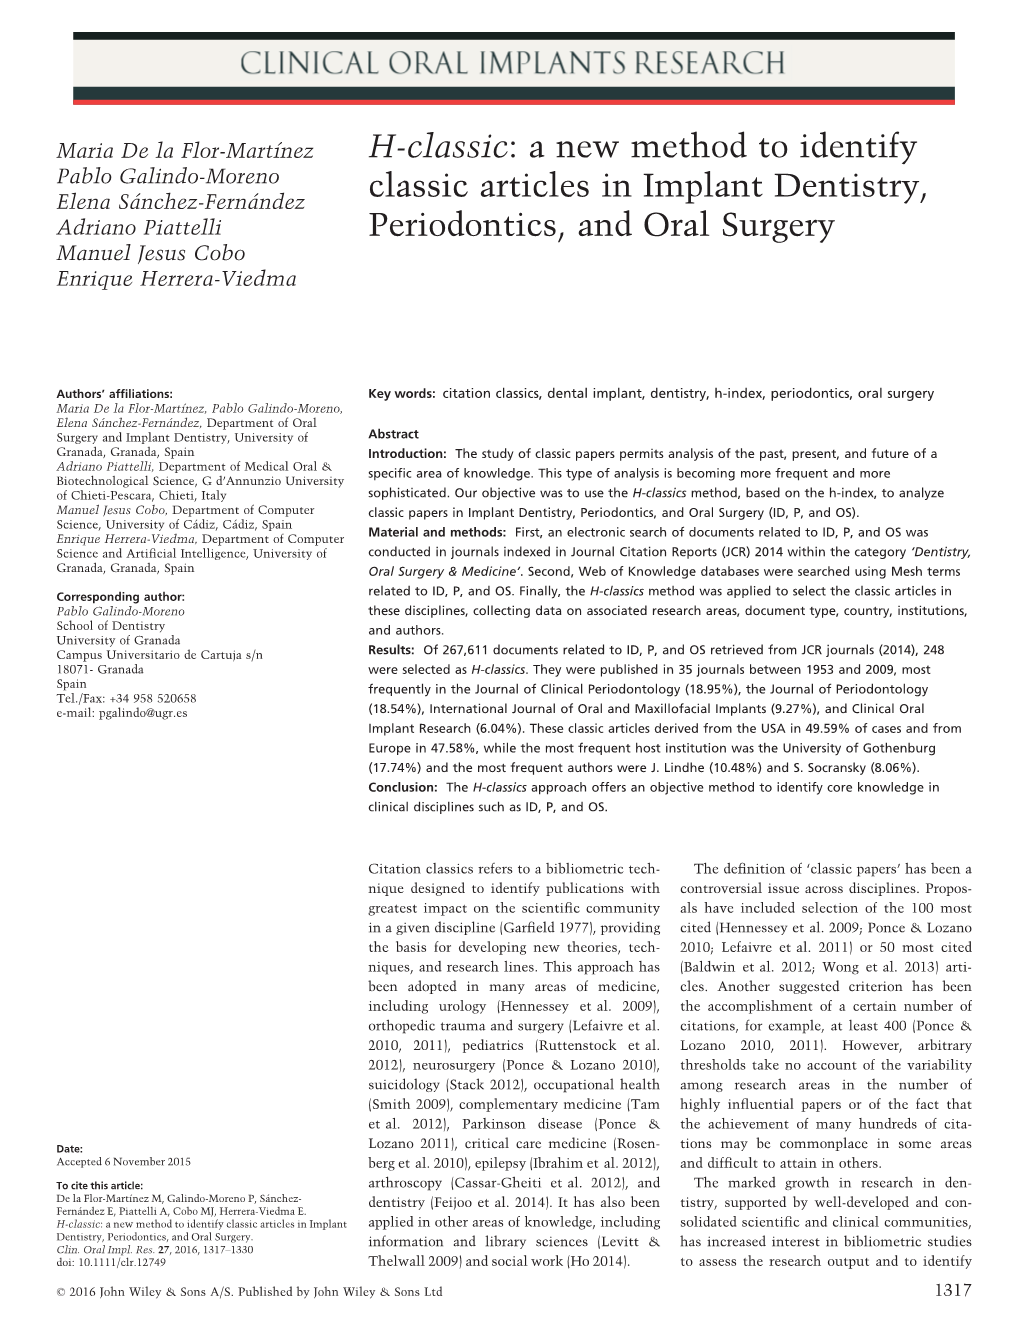 A New Method to Identify Classic Articles in Implant Dentistry, Periodontics, and Oral Surgery